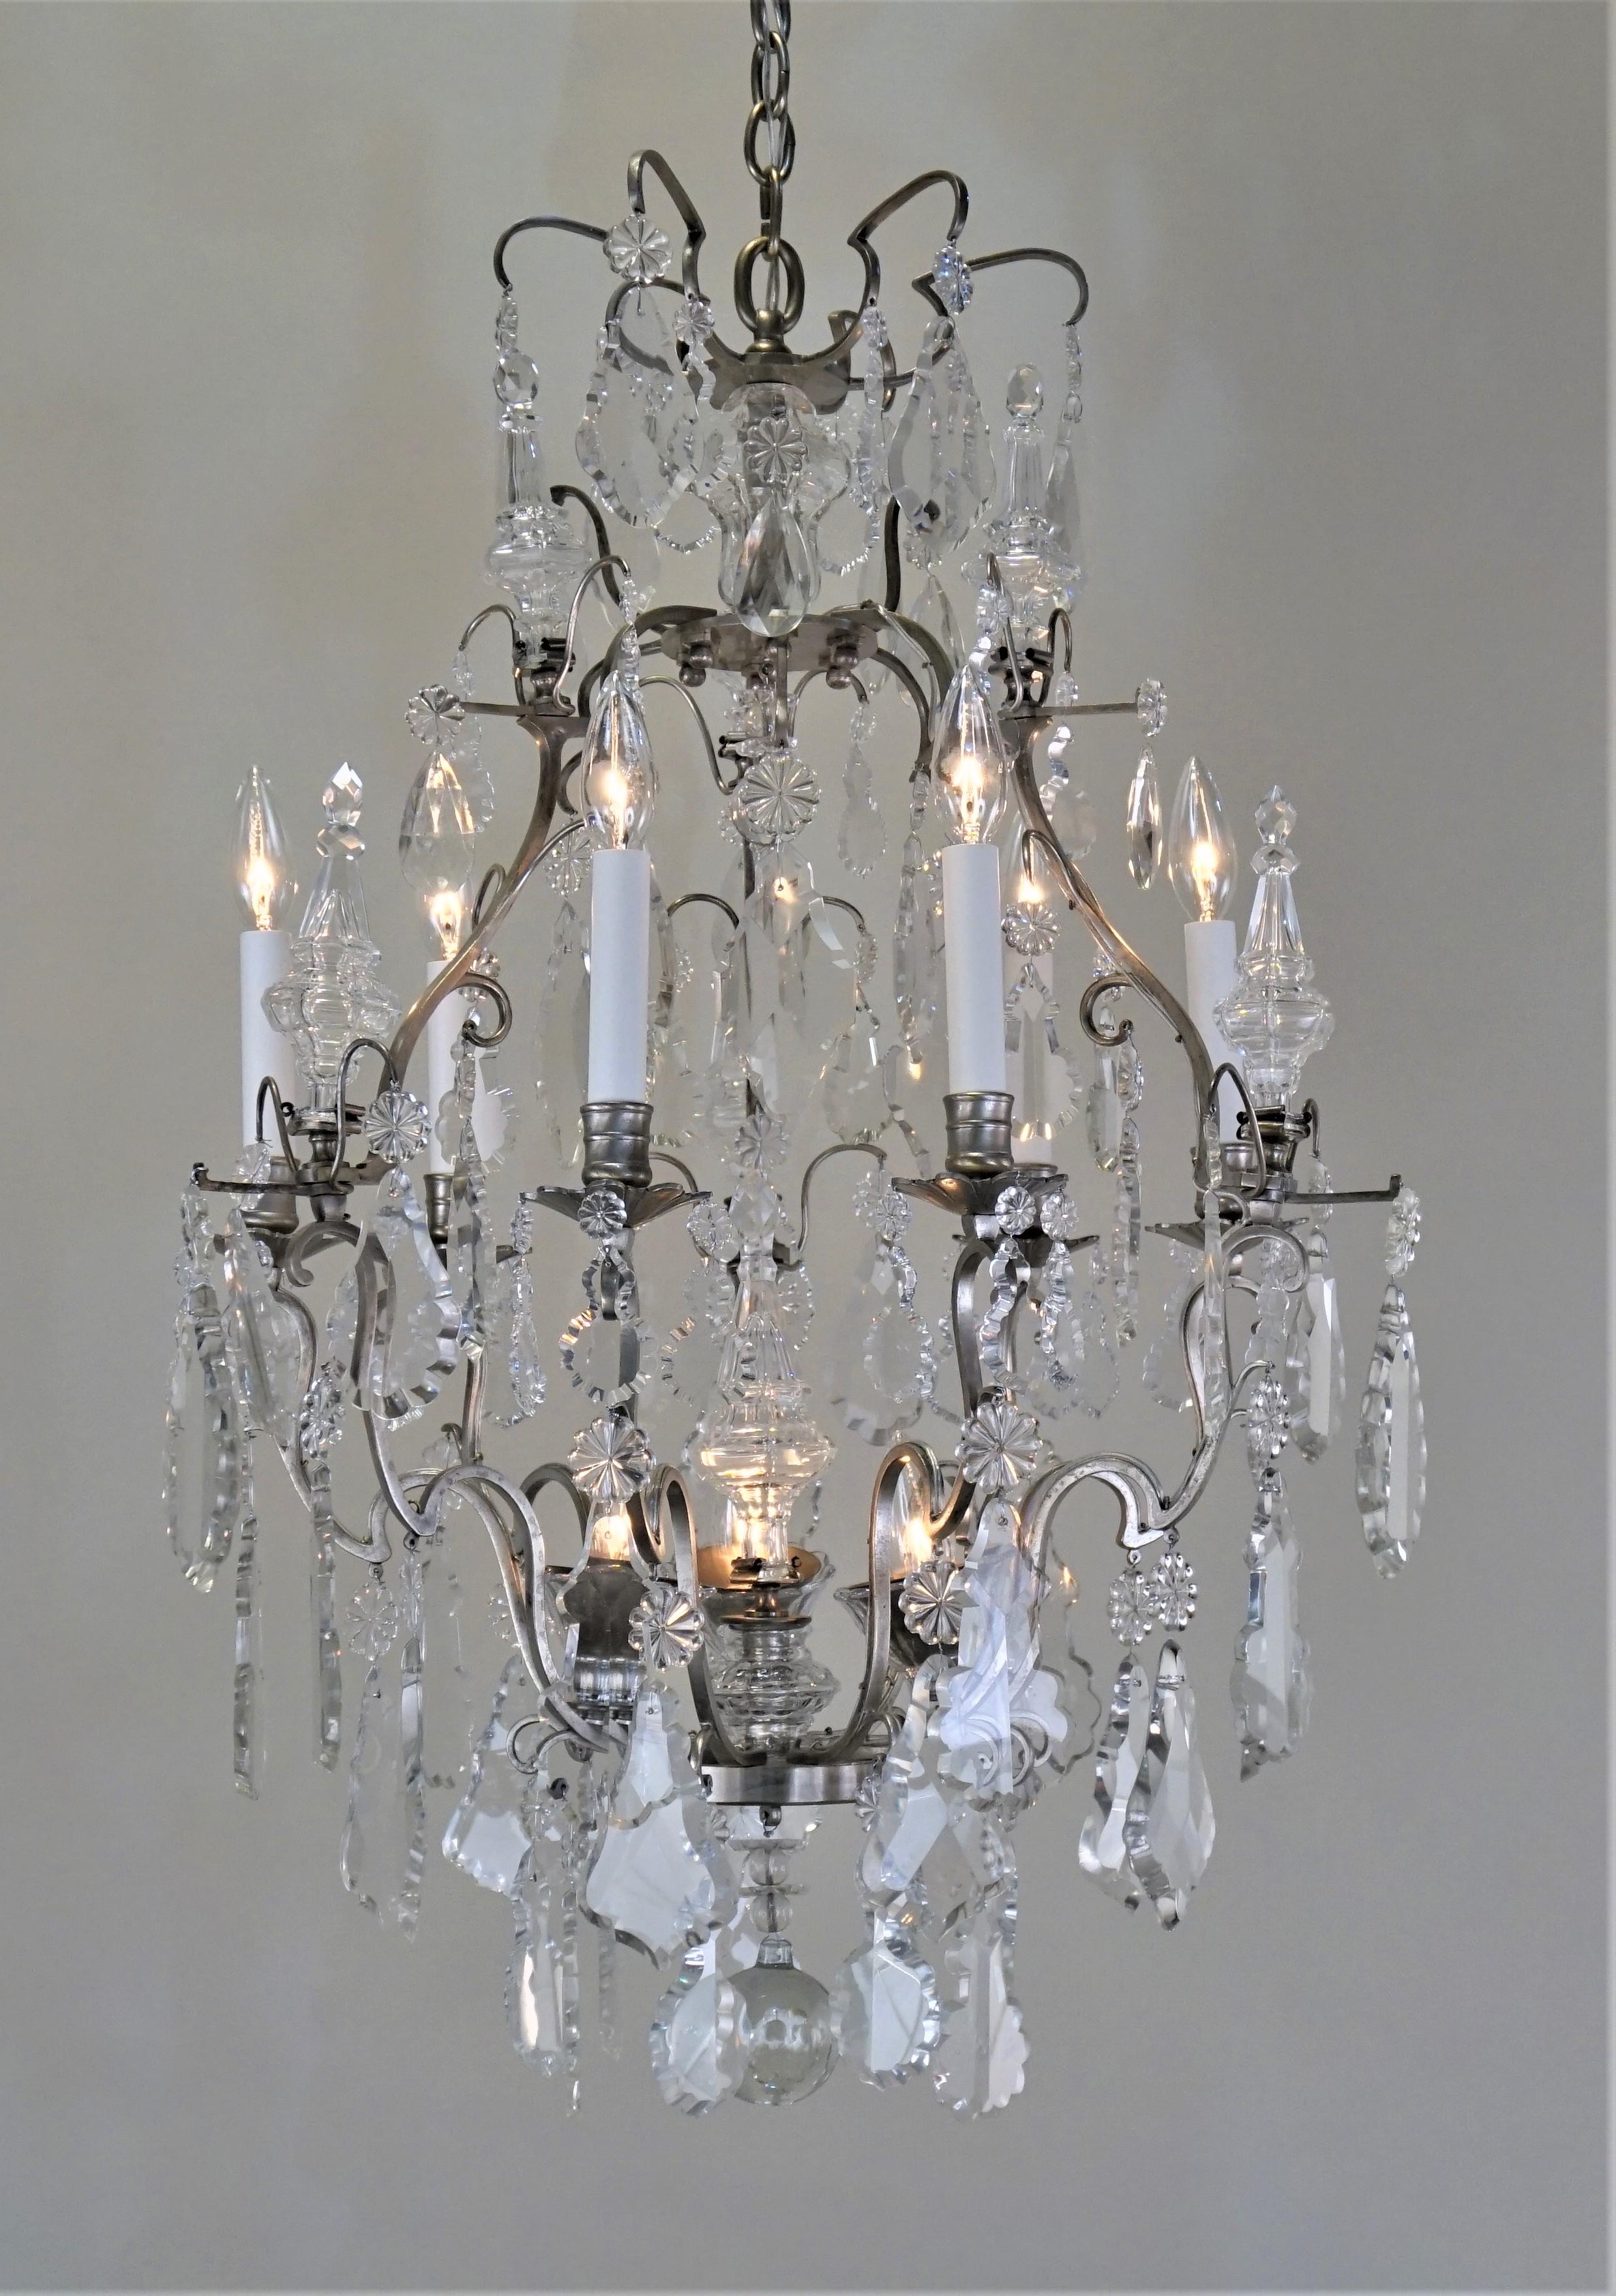 Elegant silver on bronze and hand polished crystal nine-light French 1920s chandelier.
Minimum height fully installed is 35